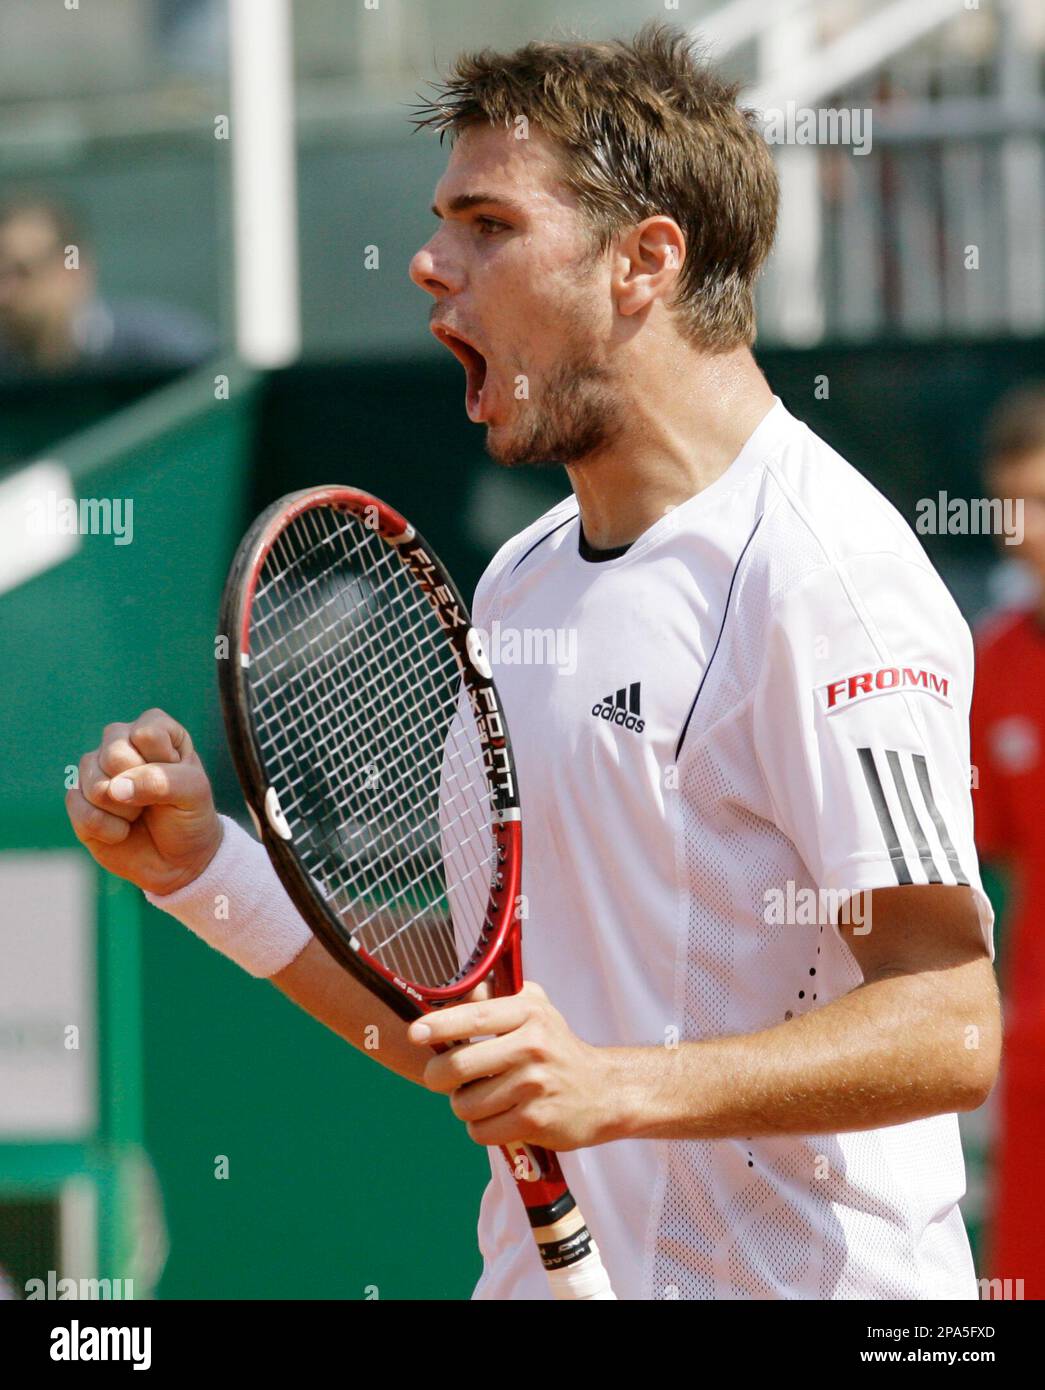 Switzerland's Stanislas Wawrinka celebrates during a men's quarter-final  against James Blake of the United Stastes match, at the Rome Master tennis  tournament, in Rome, Friday, May 9, 2008. Wawrinka won 6-7 (5),